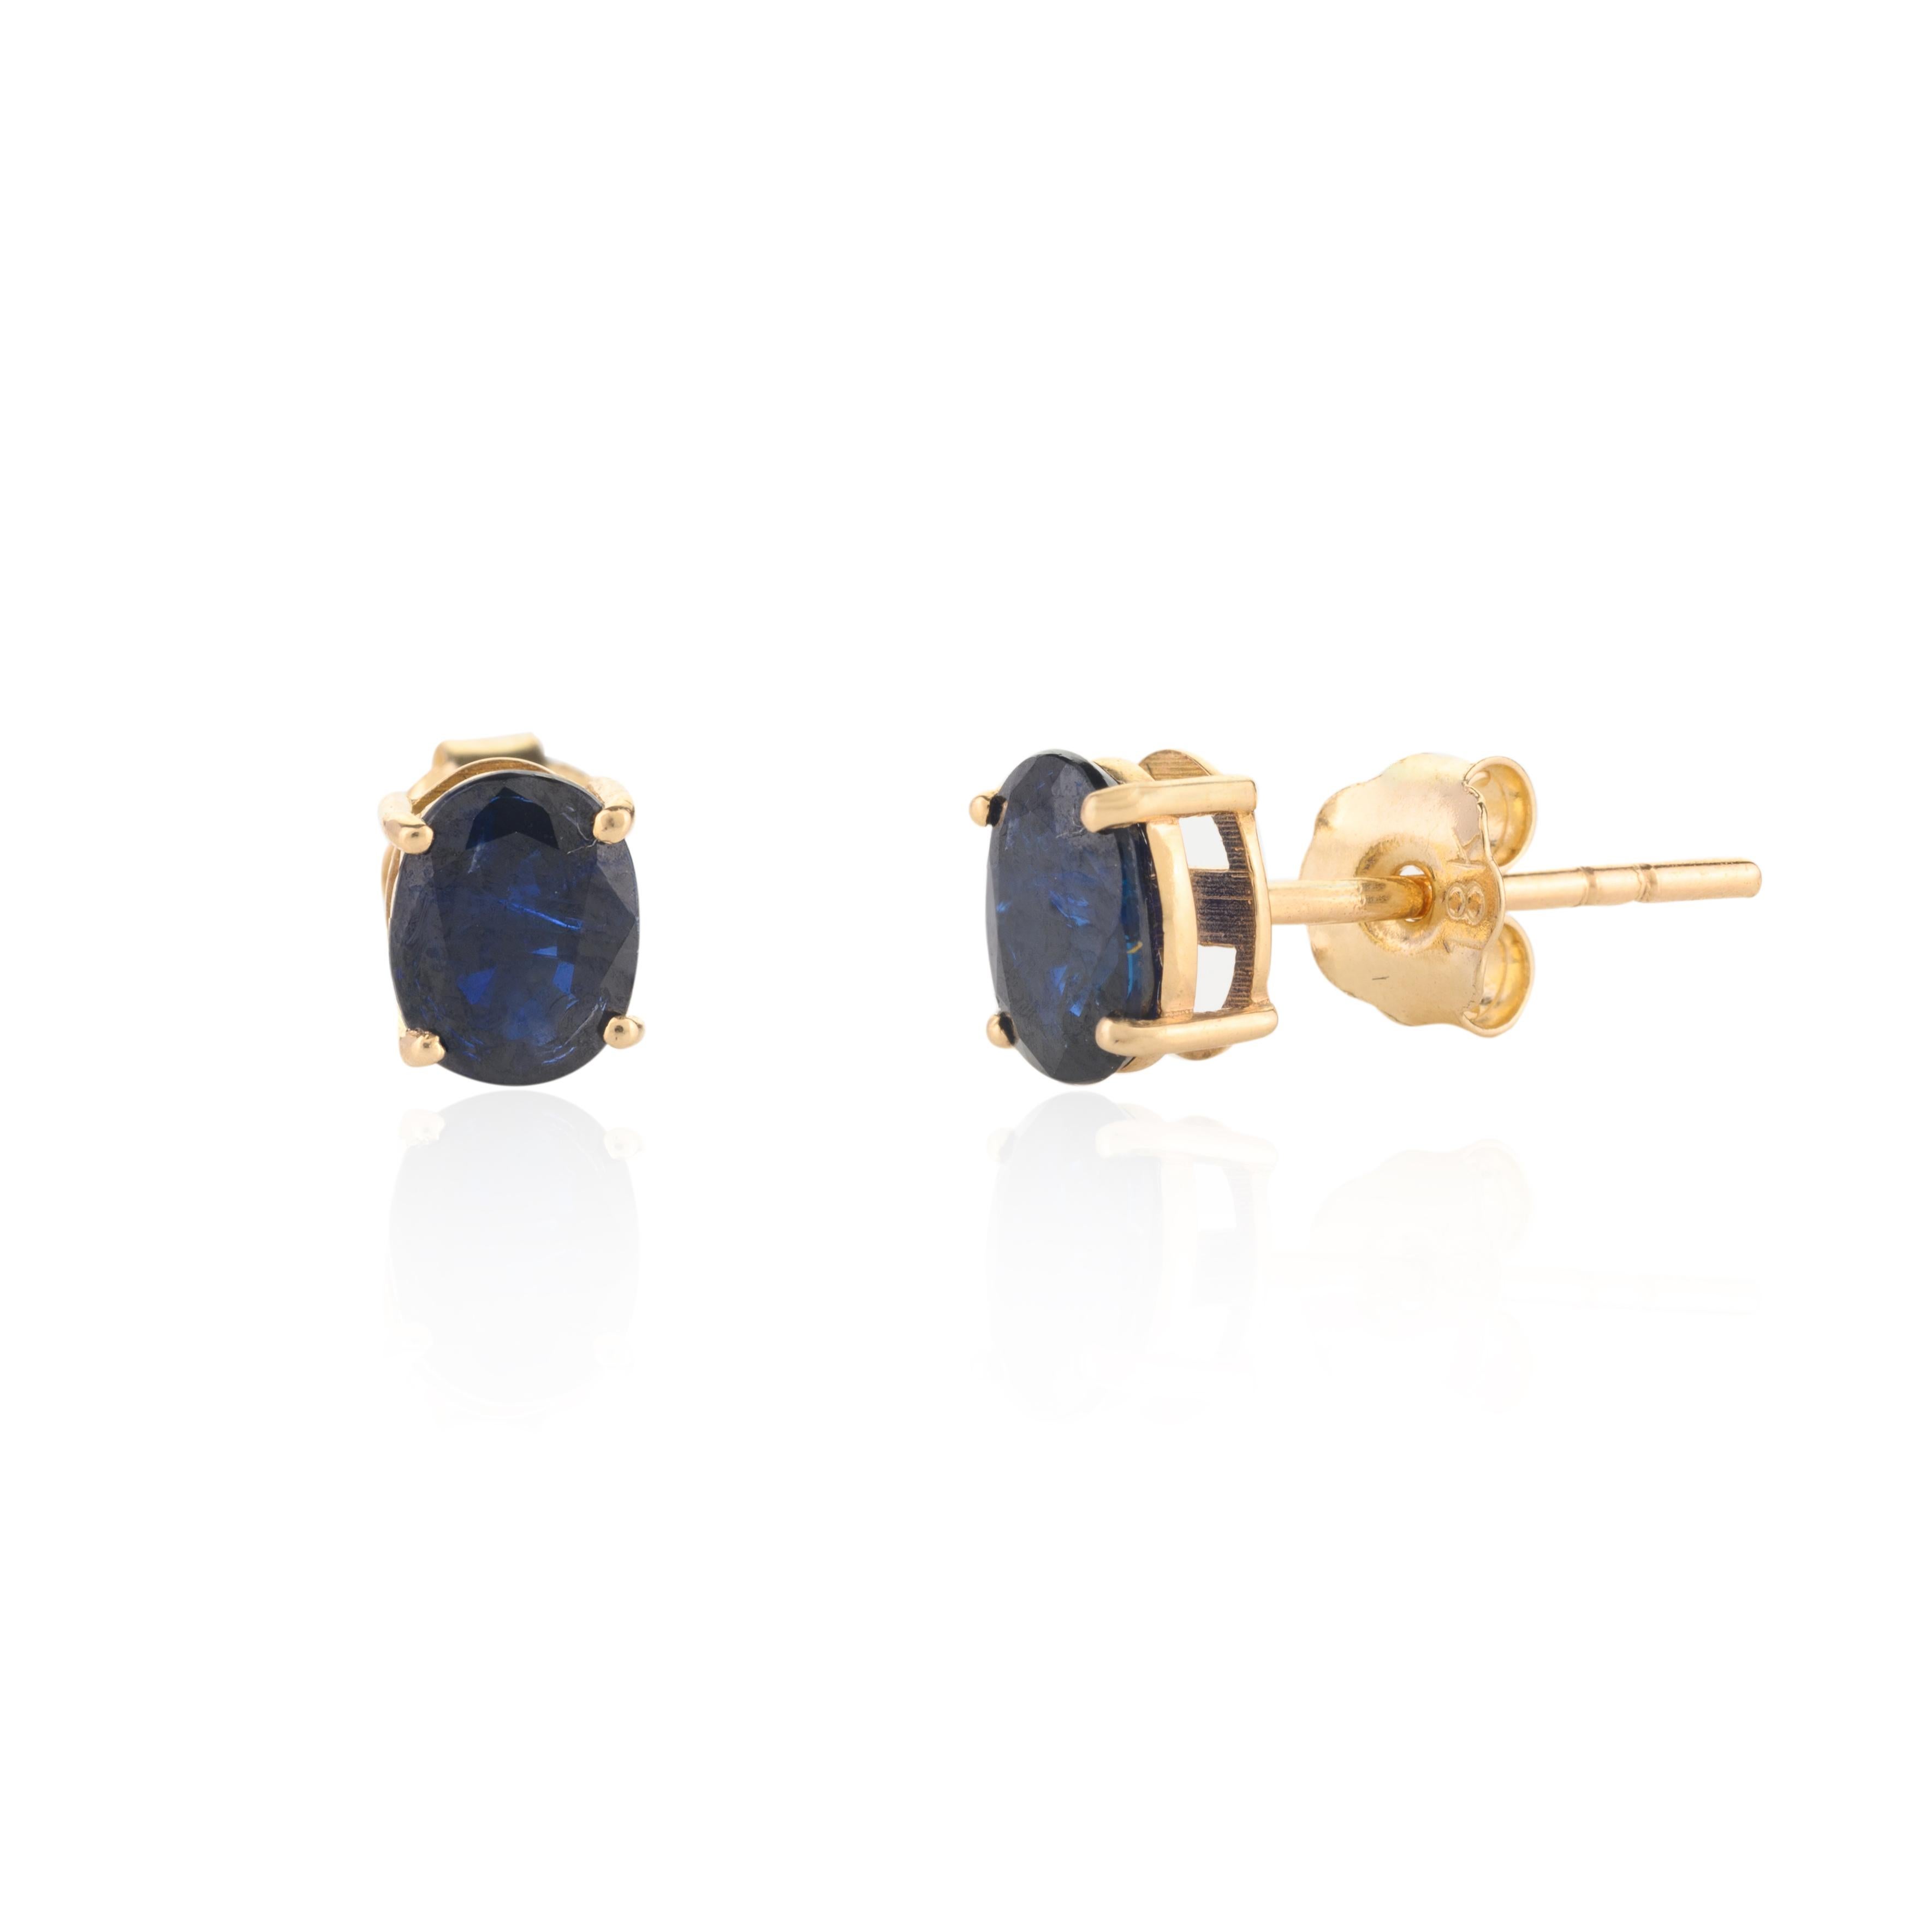 Blue Sapphire Ring, Pendant and Earrings Jewelry Set Made in 18k Yellow Gold In New Condition For Sale In Houston, TX